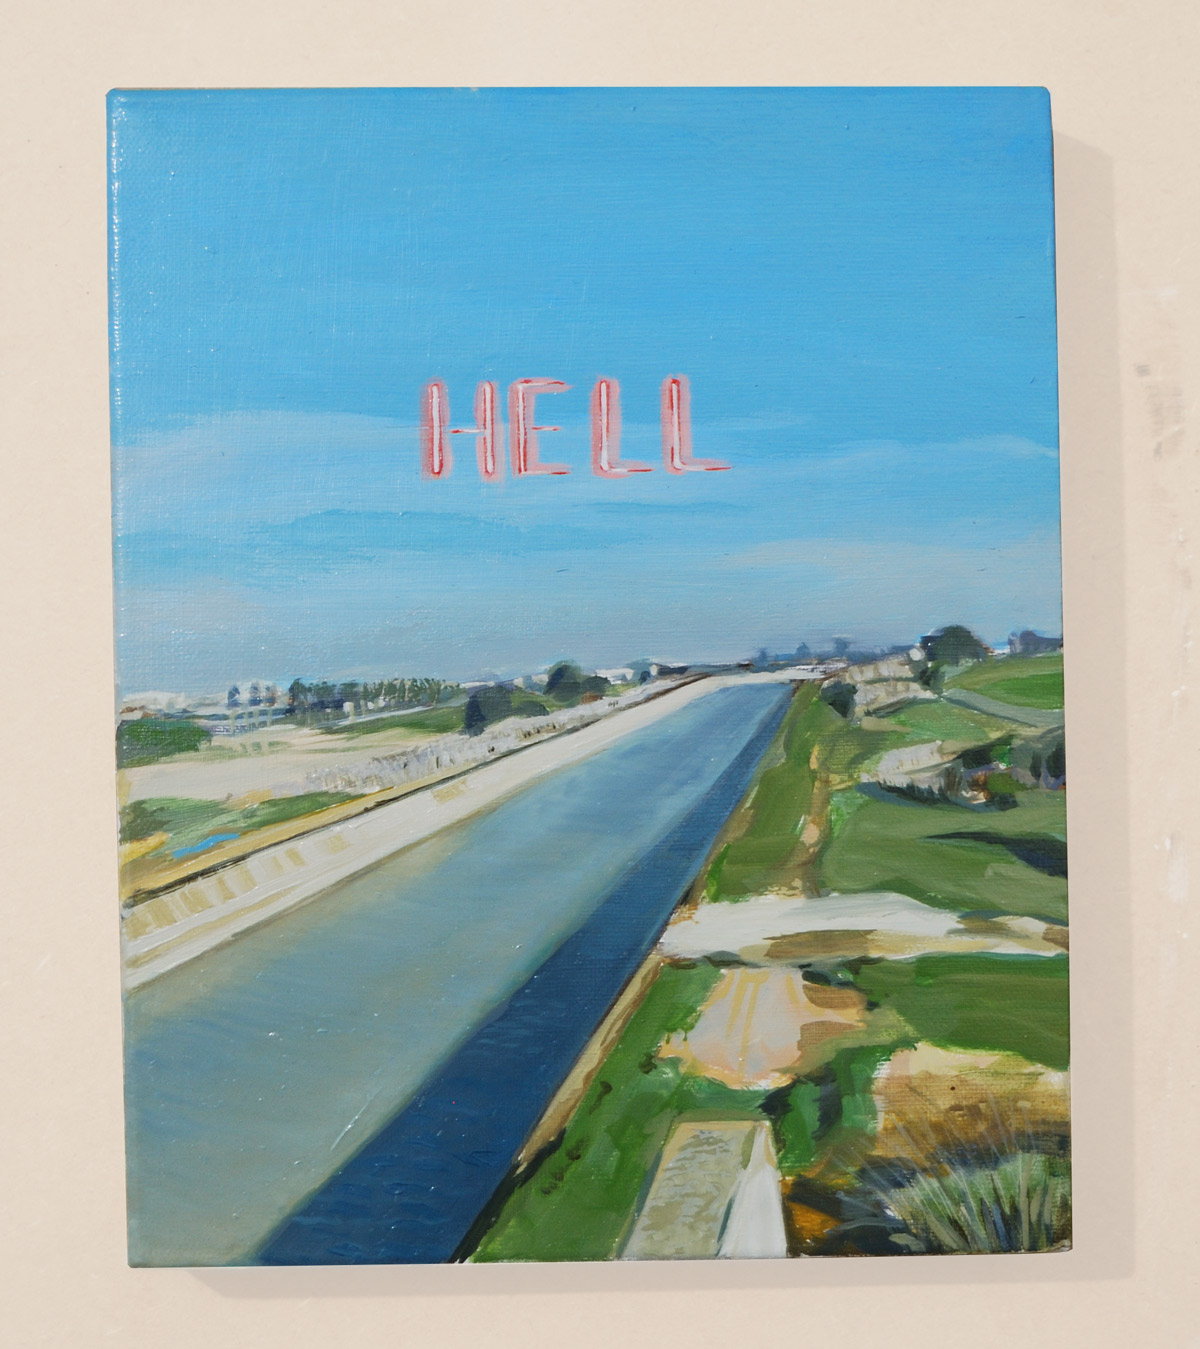 Painting of a landscape showing a water canal, the word Hell is floating above the canal.